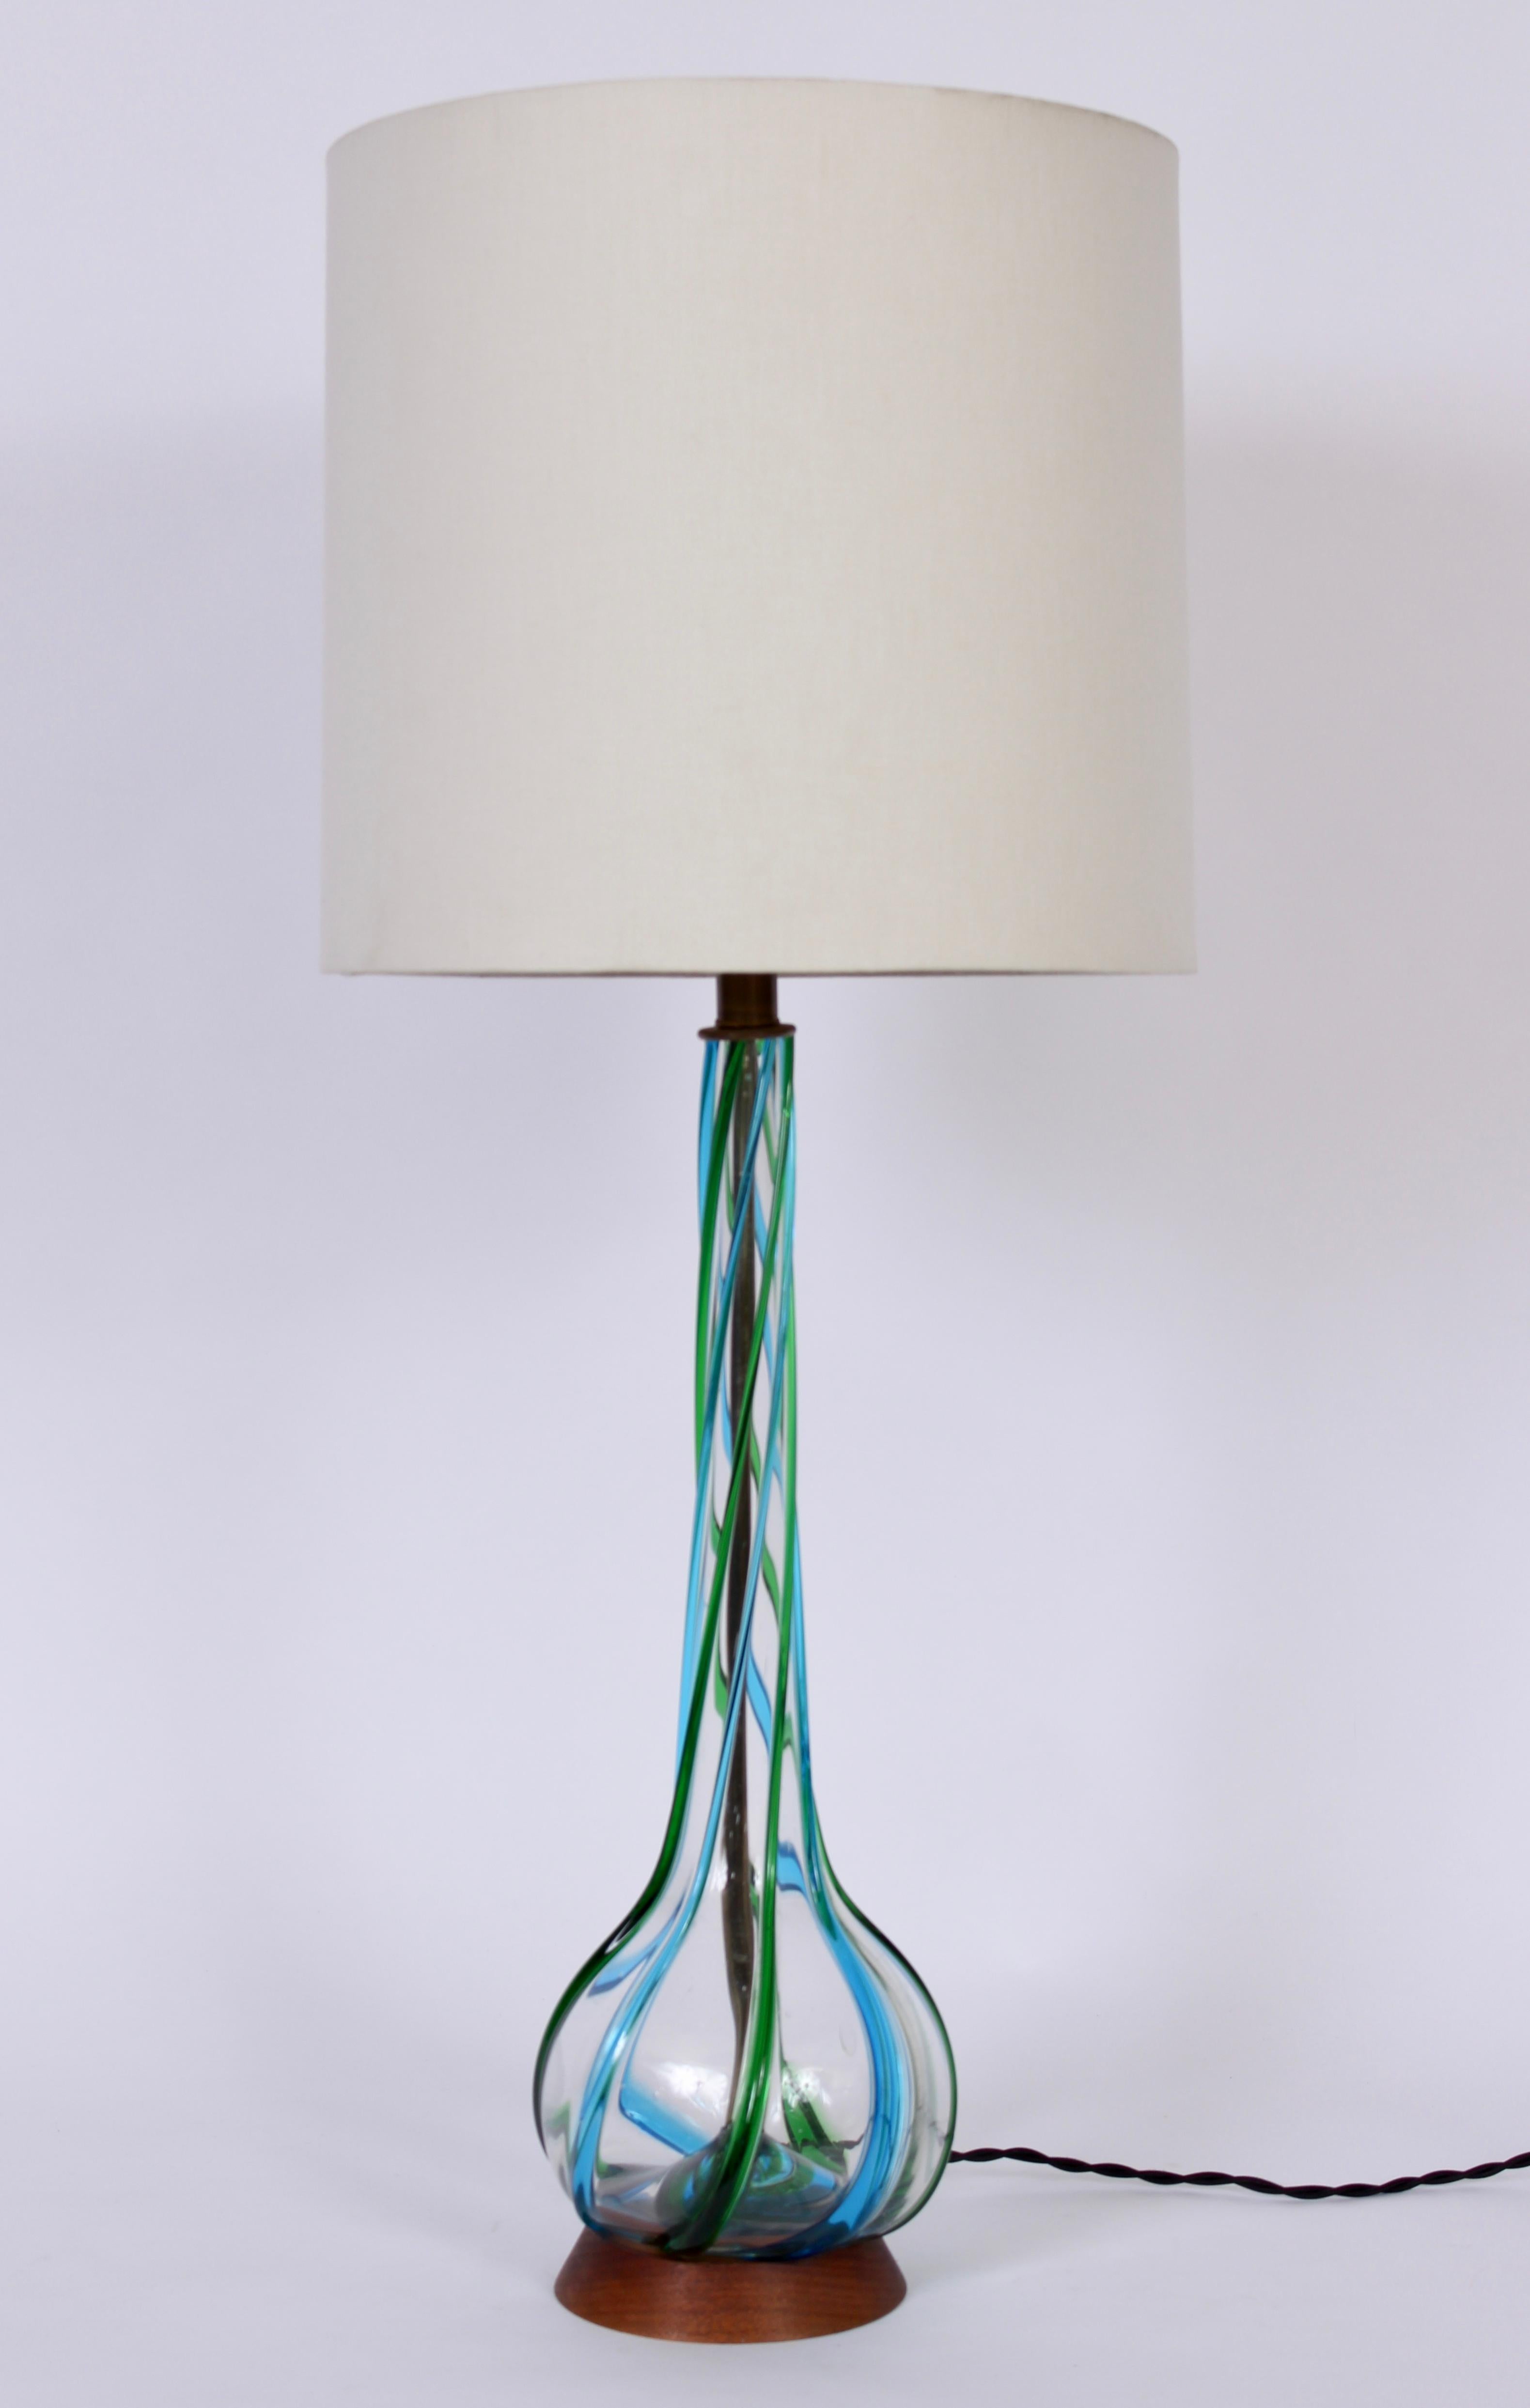 Plated Tall Hand Blown Clear Murano Art Glass Lamp with Aqua and Green Ribbon Swirls